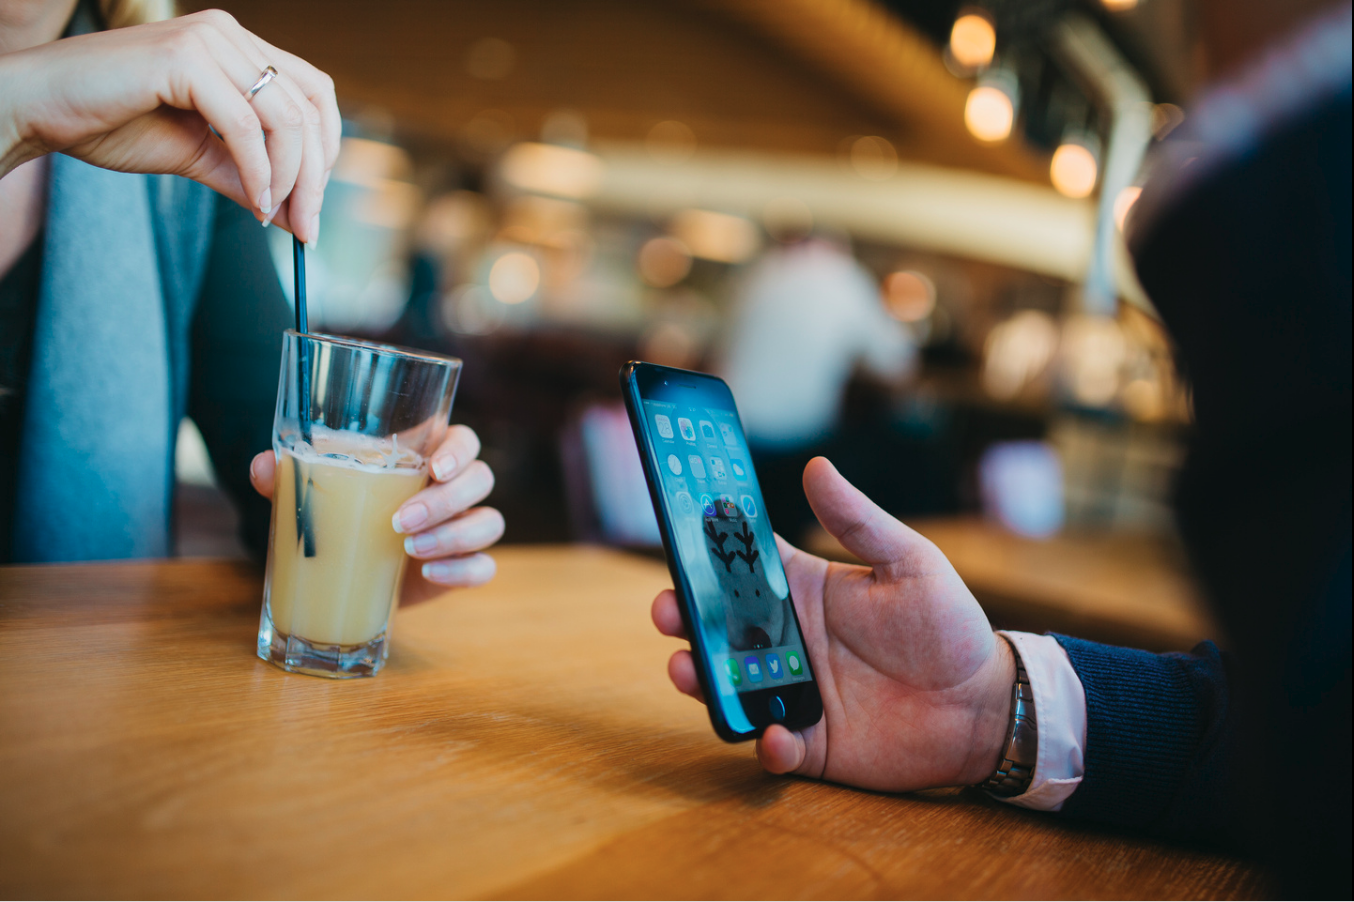 A man holding a mobile phone sat opposite a woman holding a drink